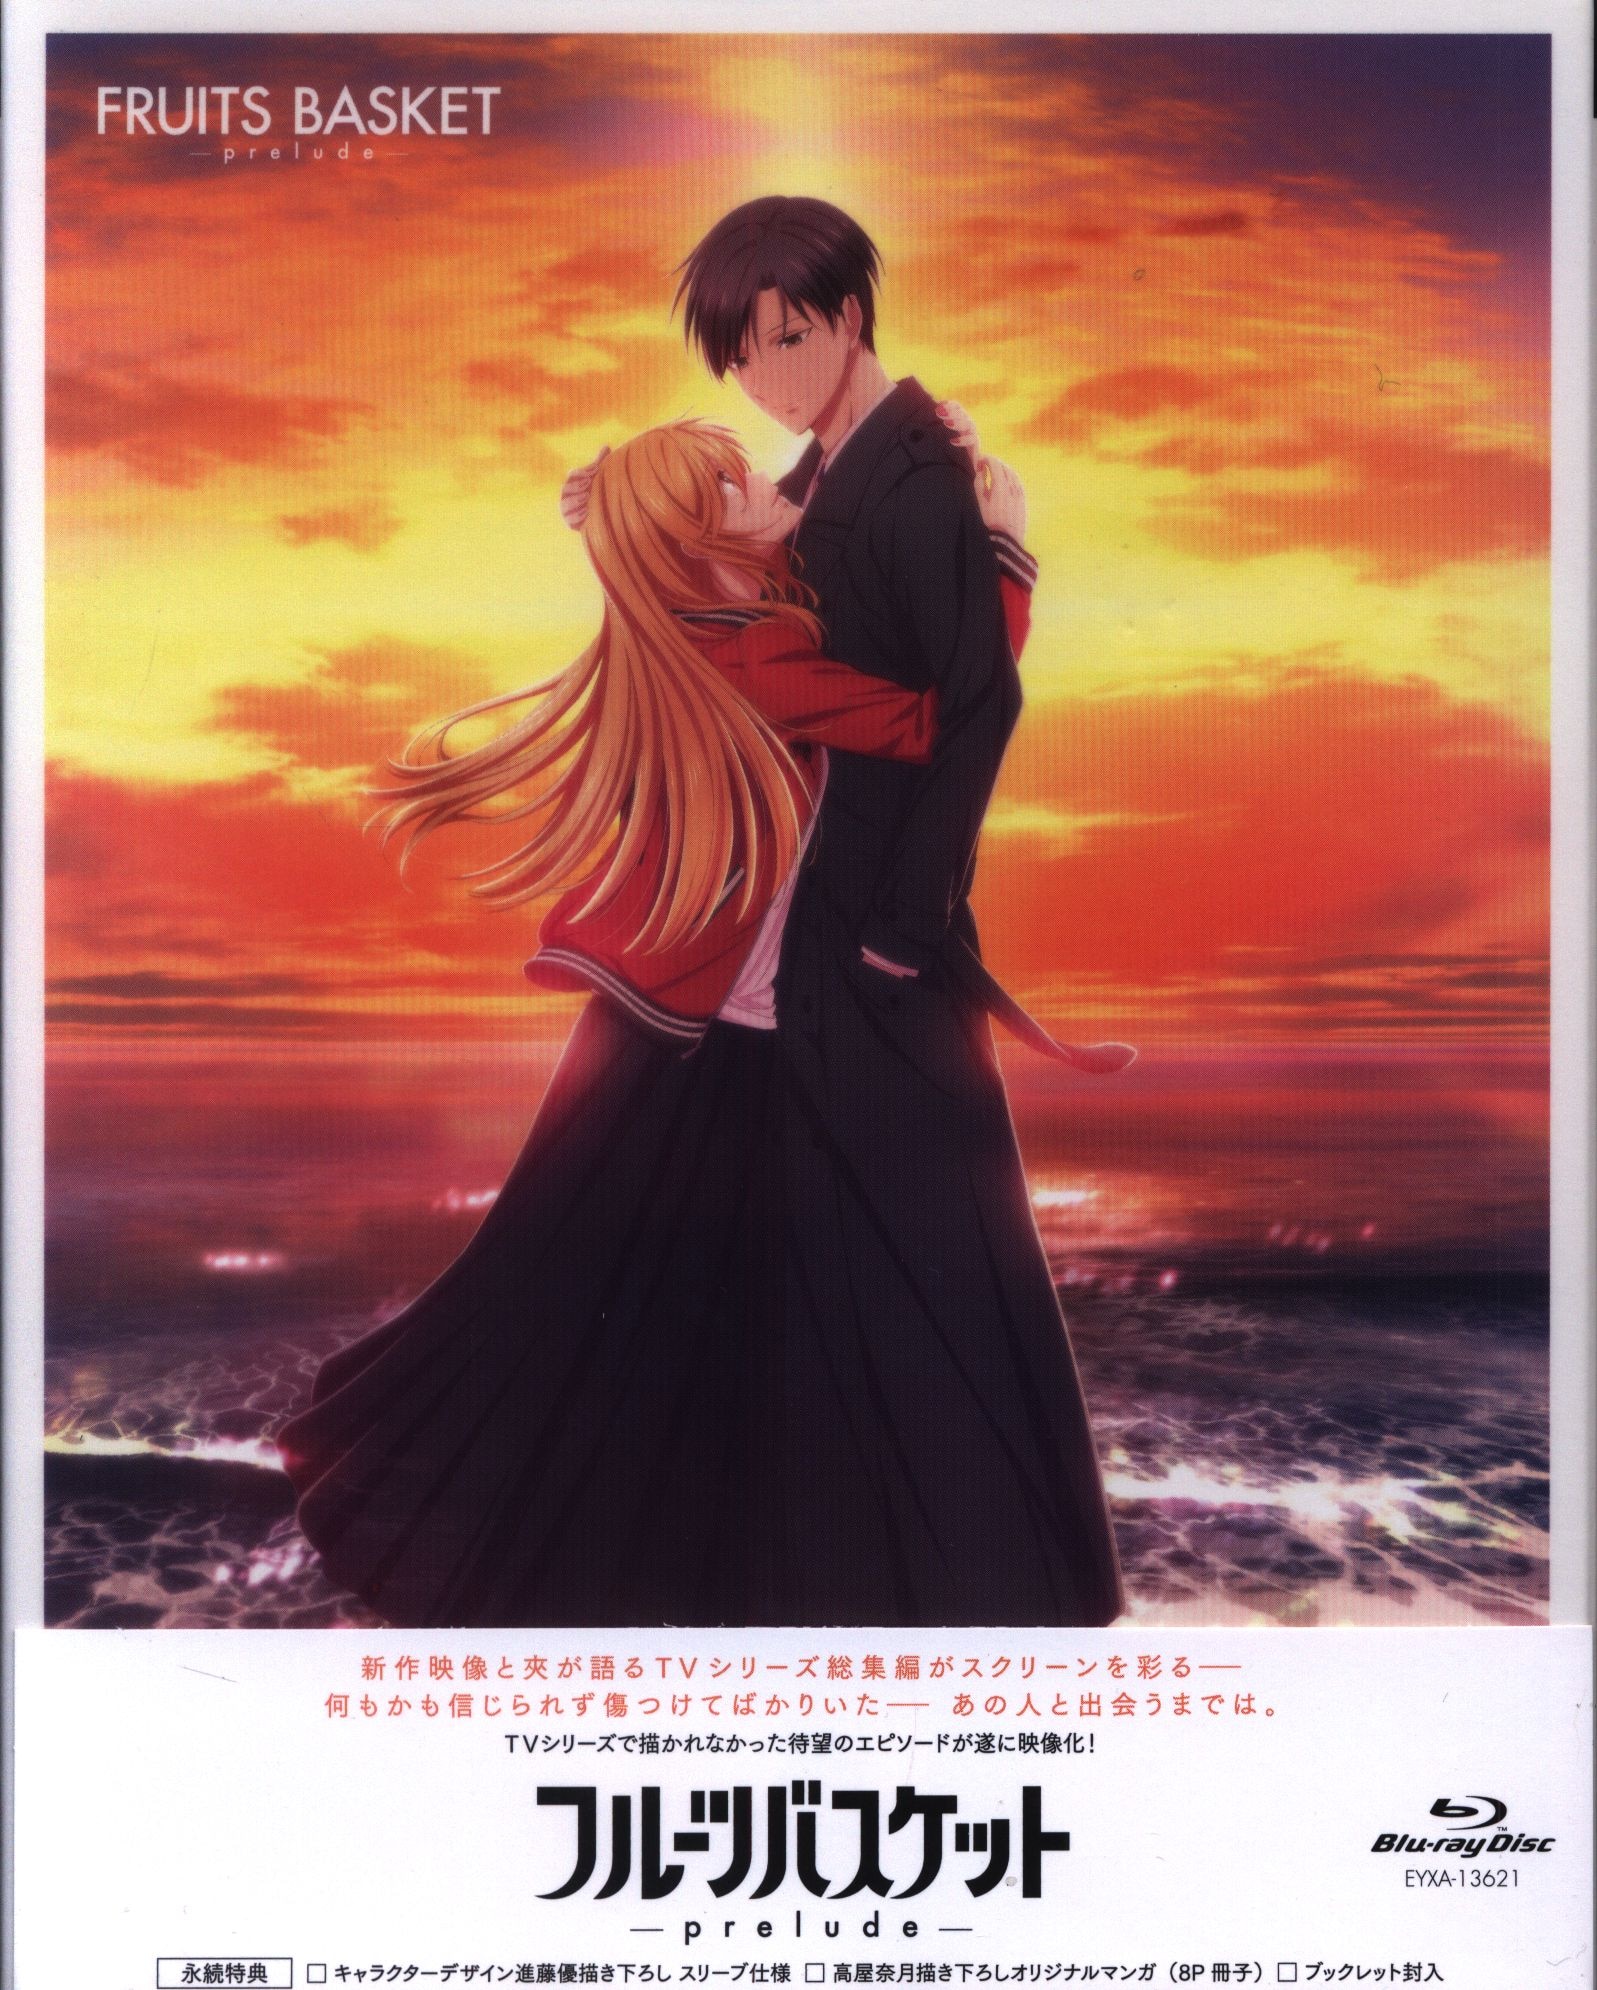 Fruits Basket Prelude Trailer Depicts Unseen Love Story